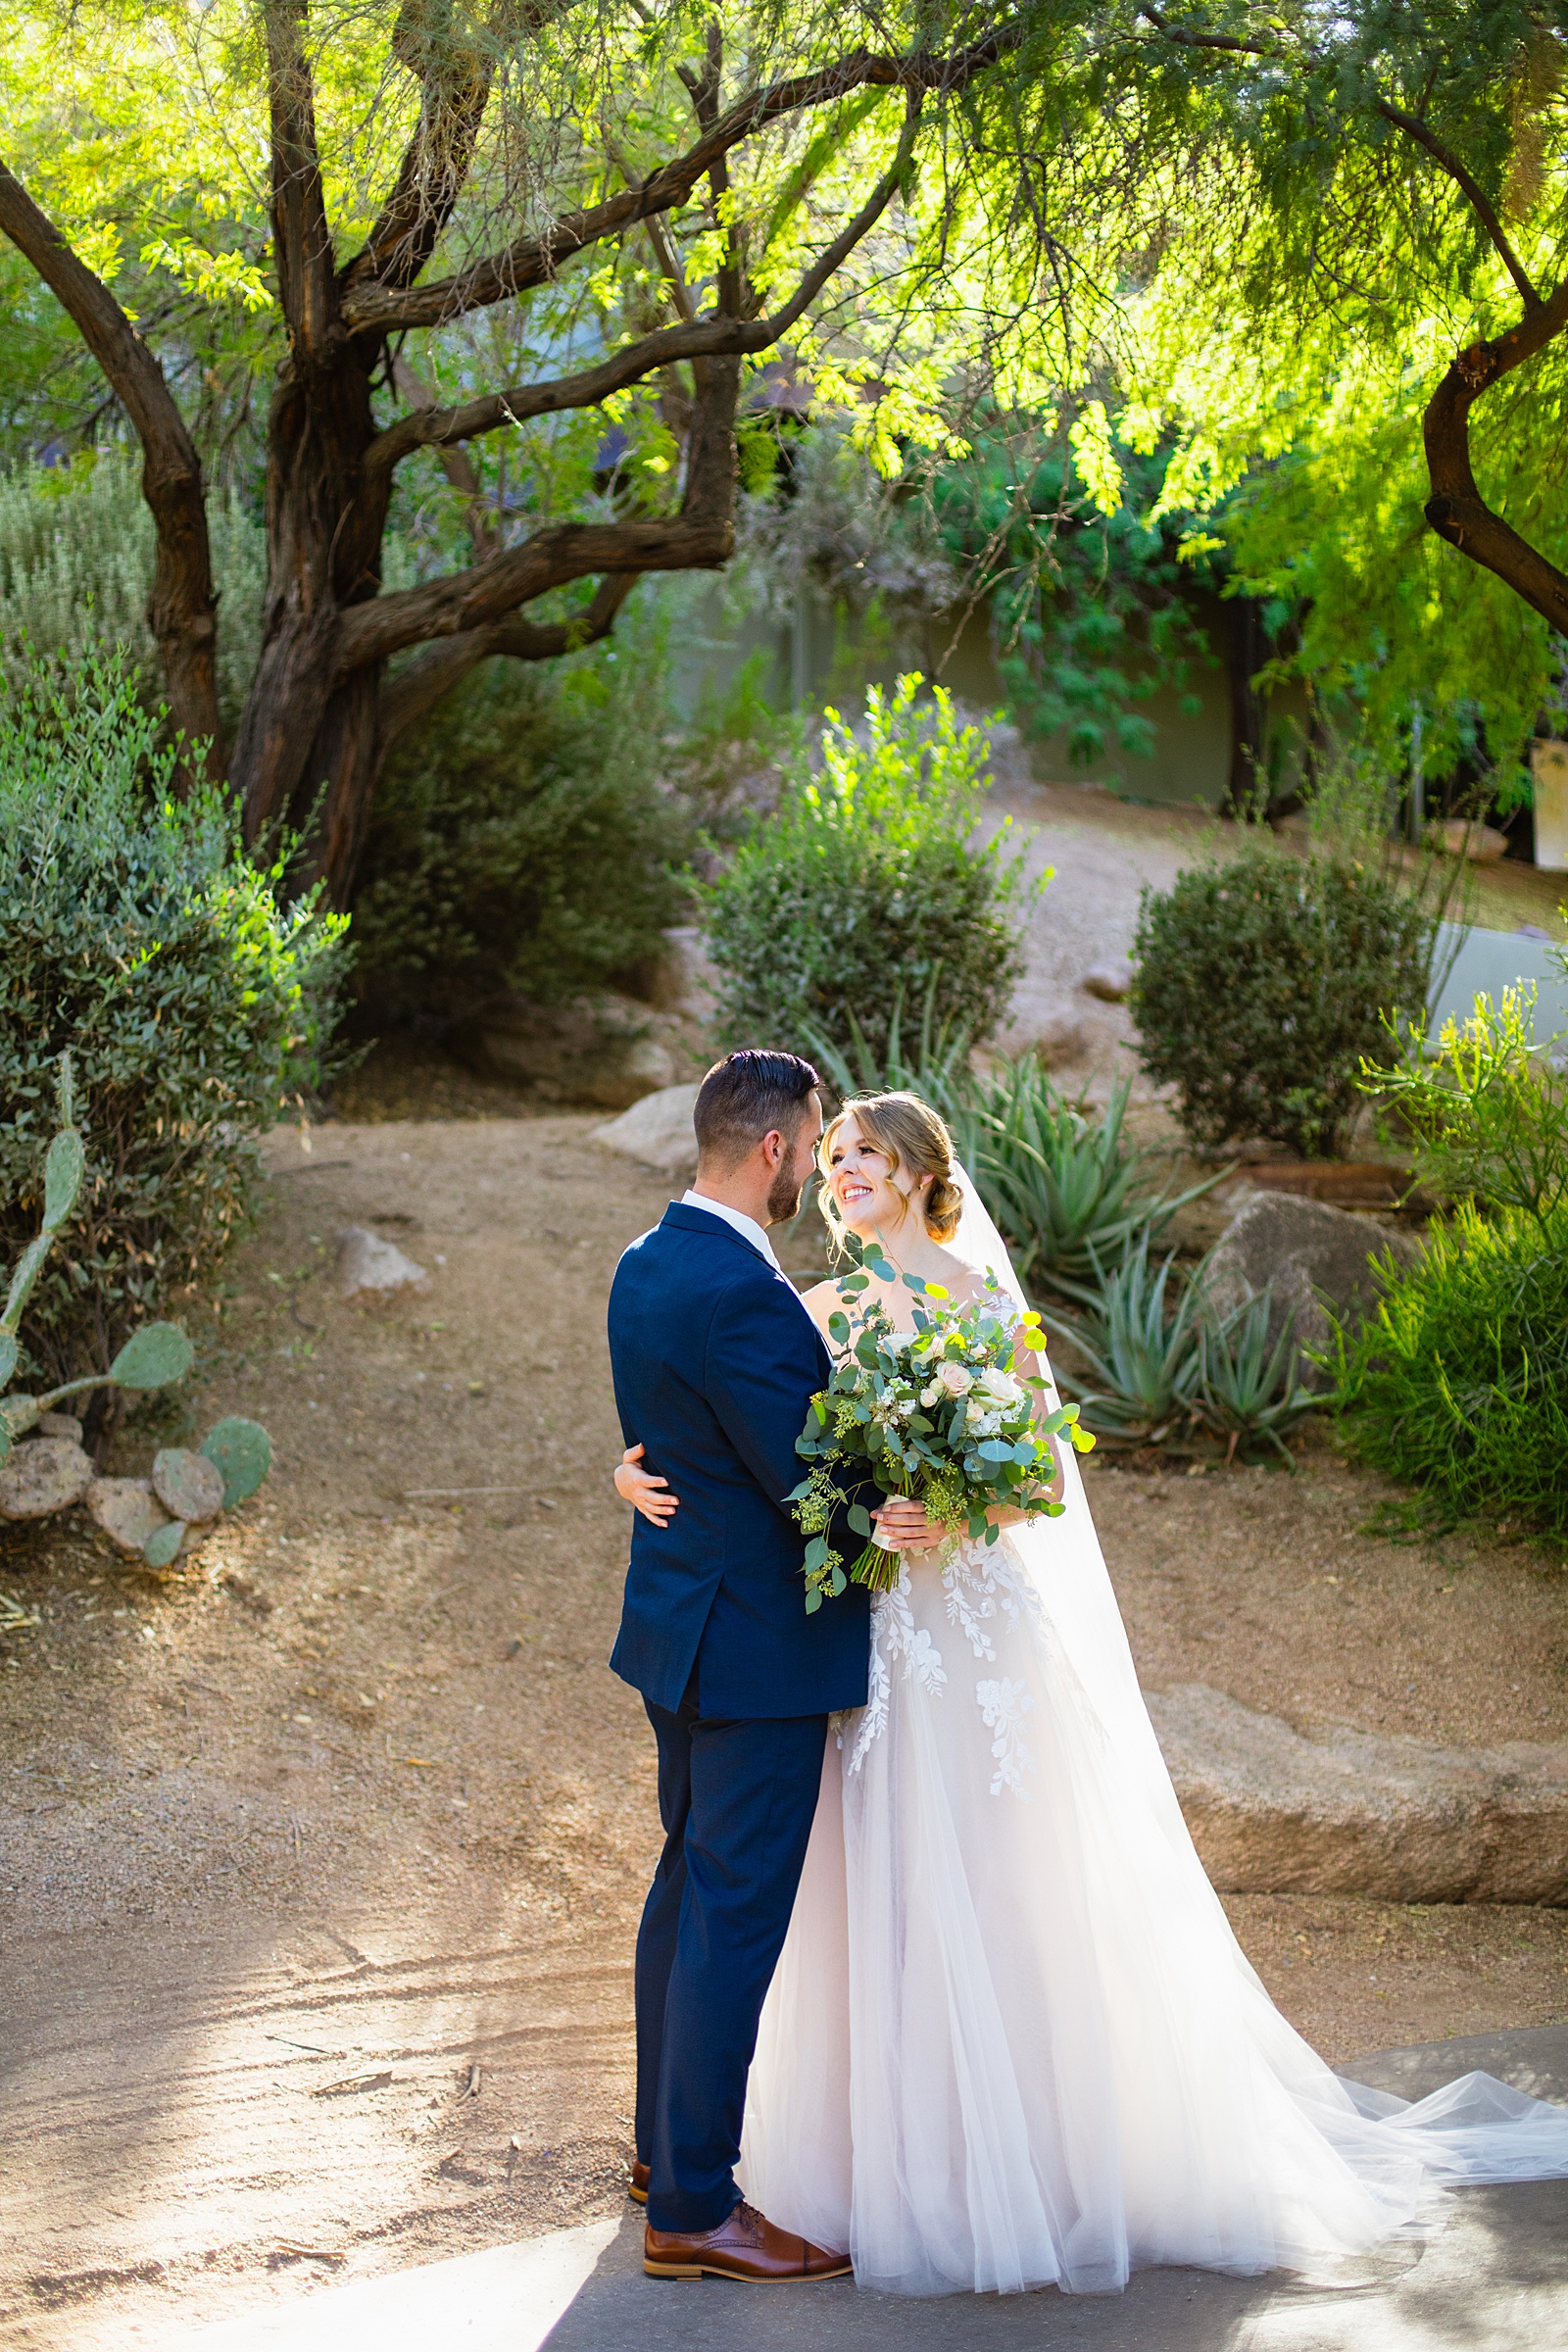 Bride & Groom's first look at Sanctuary by Phoenix wedding photographer Juniper and Co Photography.